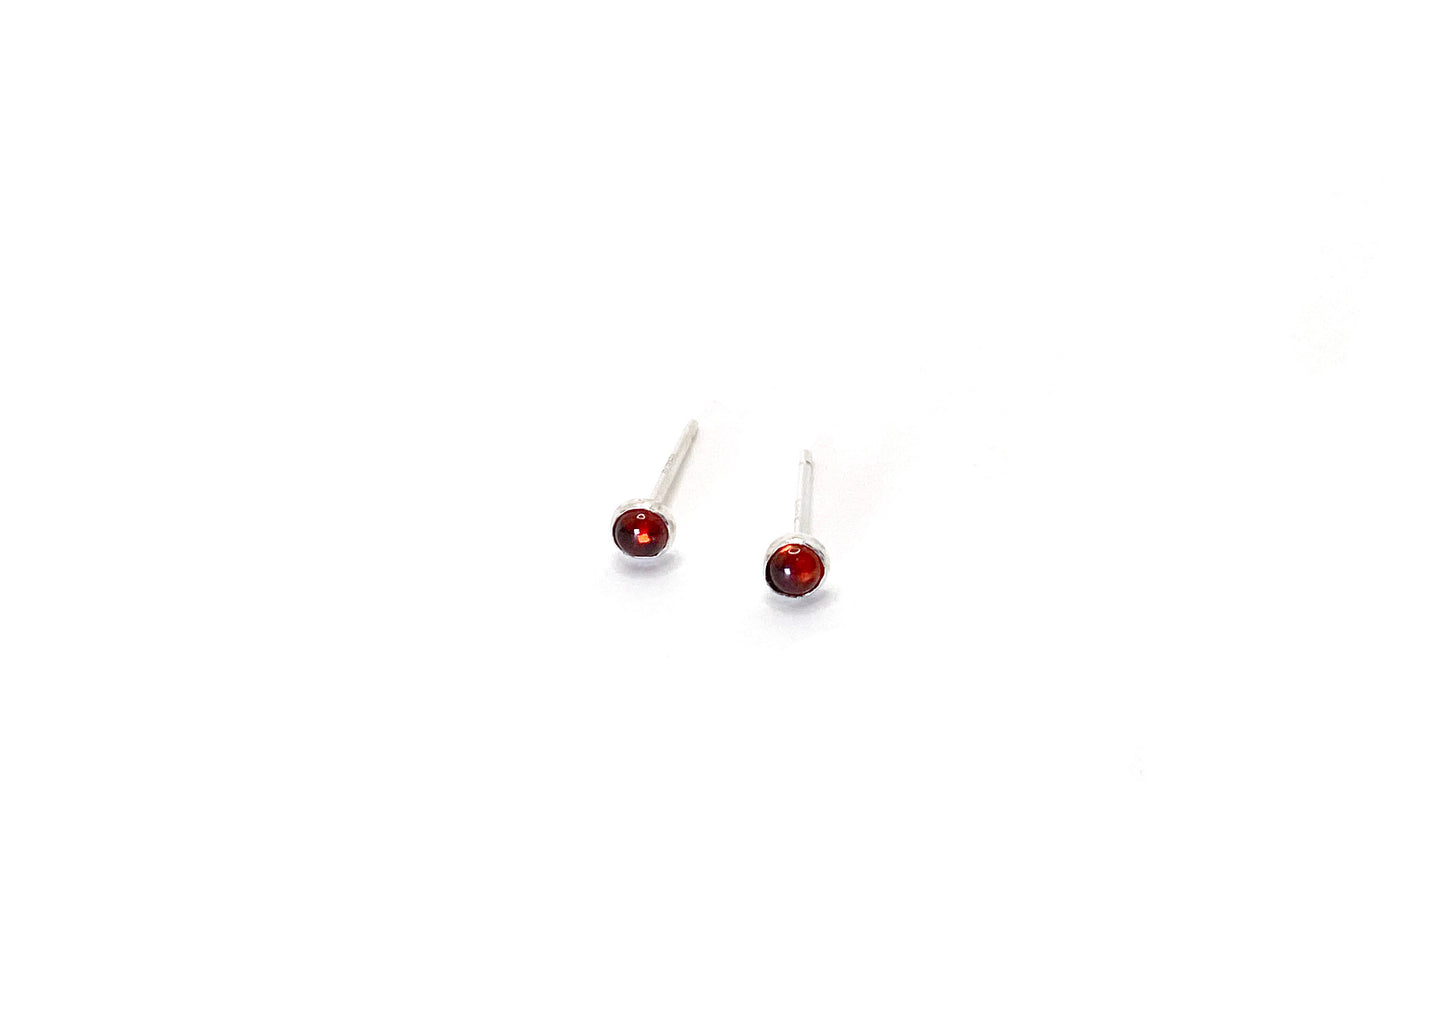 Tiny 3mm round garnet and sterling silver stud earrings